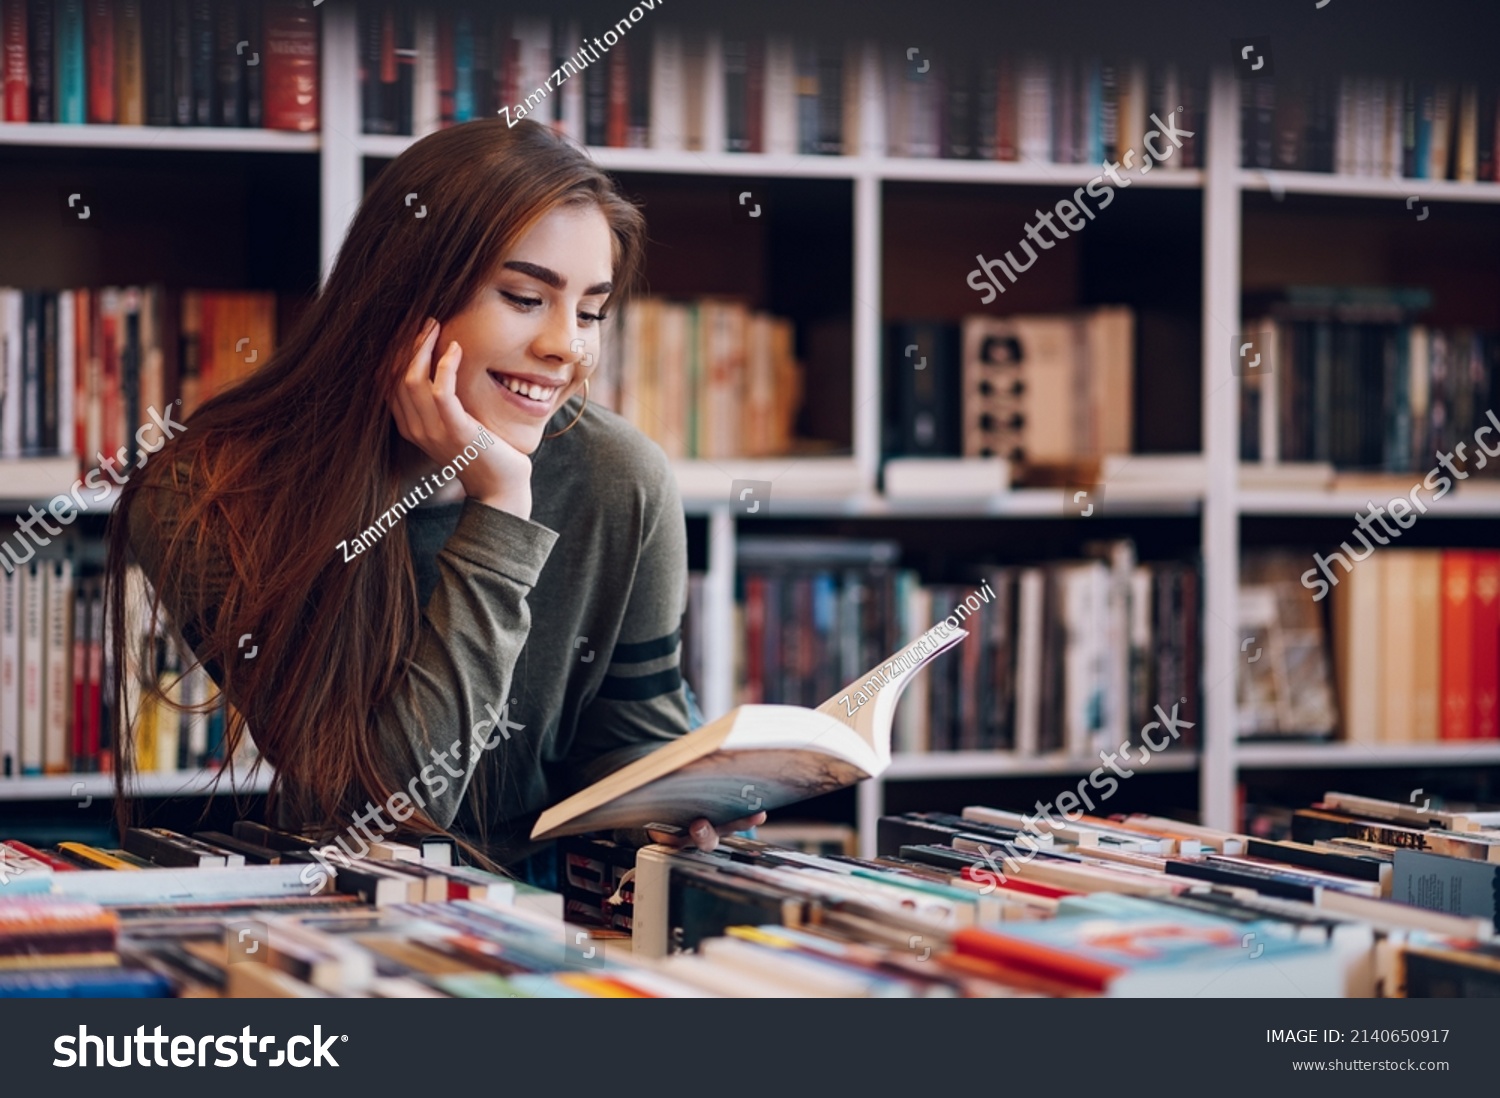 Portrait of a pretty smiling girl reading book while buying in a bookstore. Choosing a good book to buy in a bookstore. Woman interested in a book. #2140650917